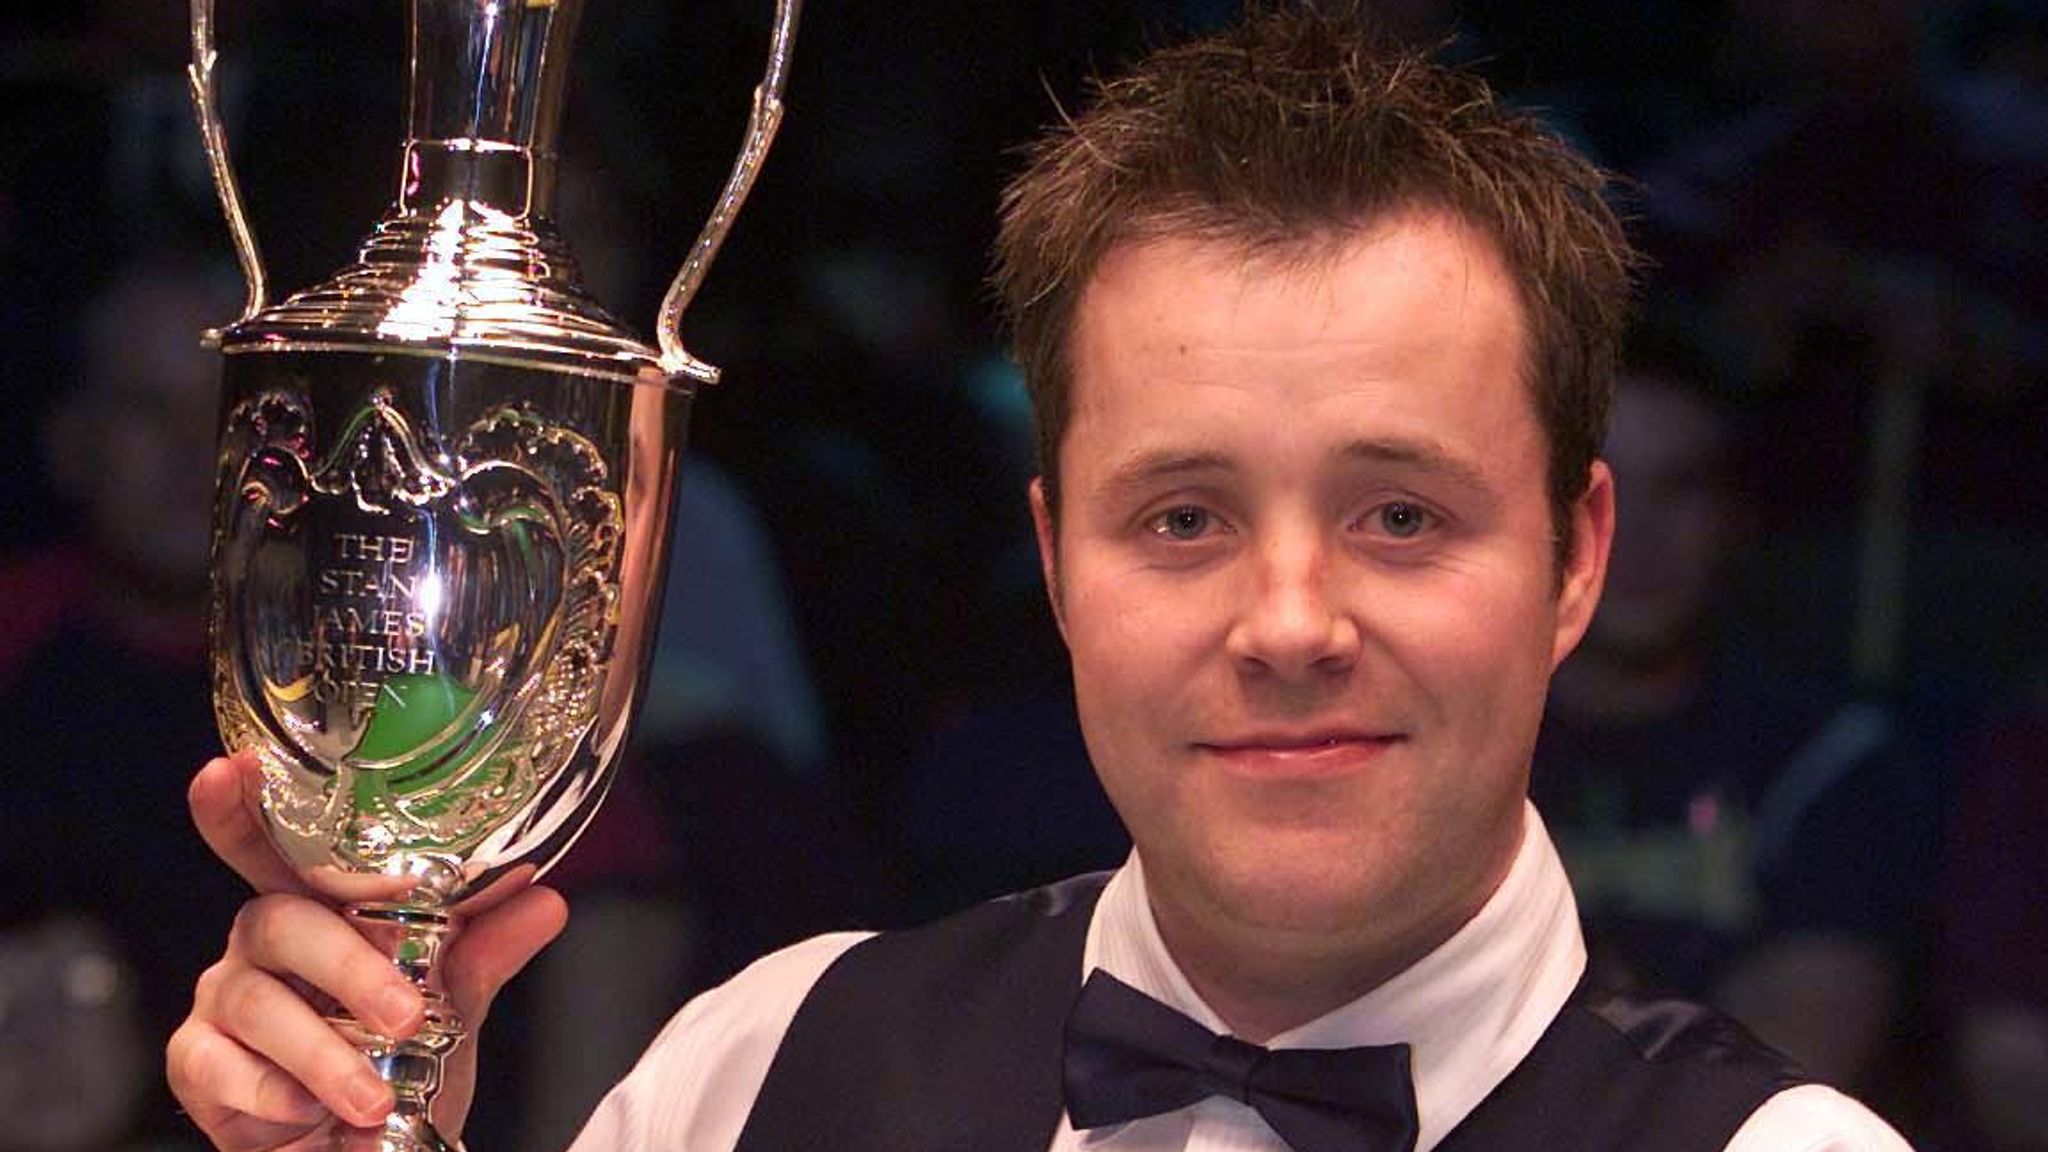 The British Open returns to the snooker calendar for the first time in